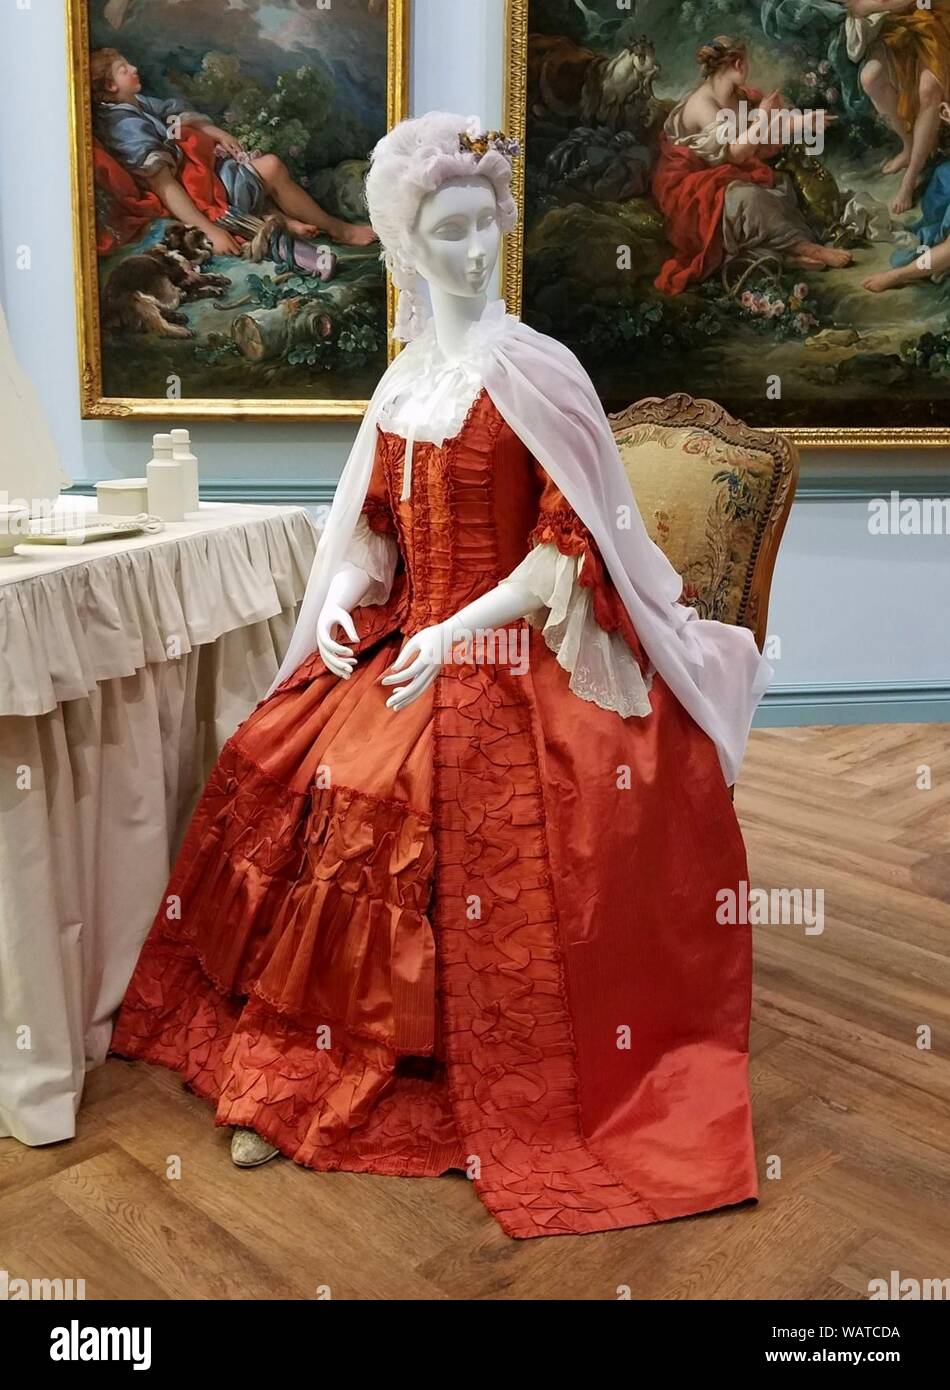 Dress and petticoat, France, c. 1760s, silk satin with weft float patterning Stock Photo